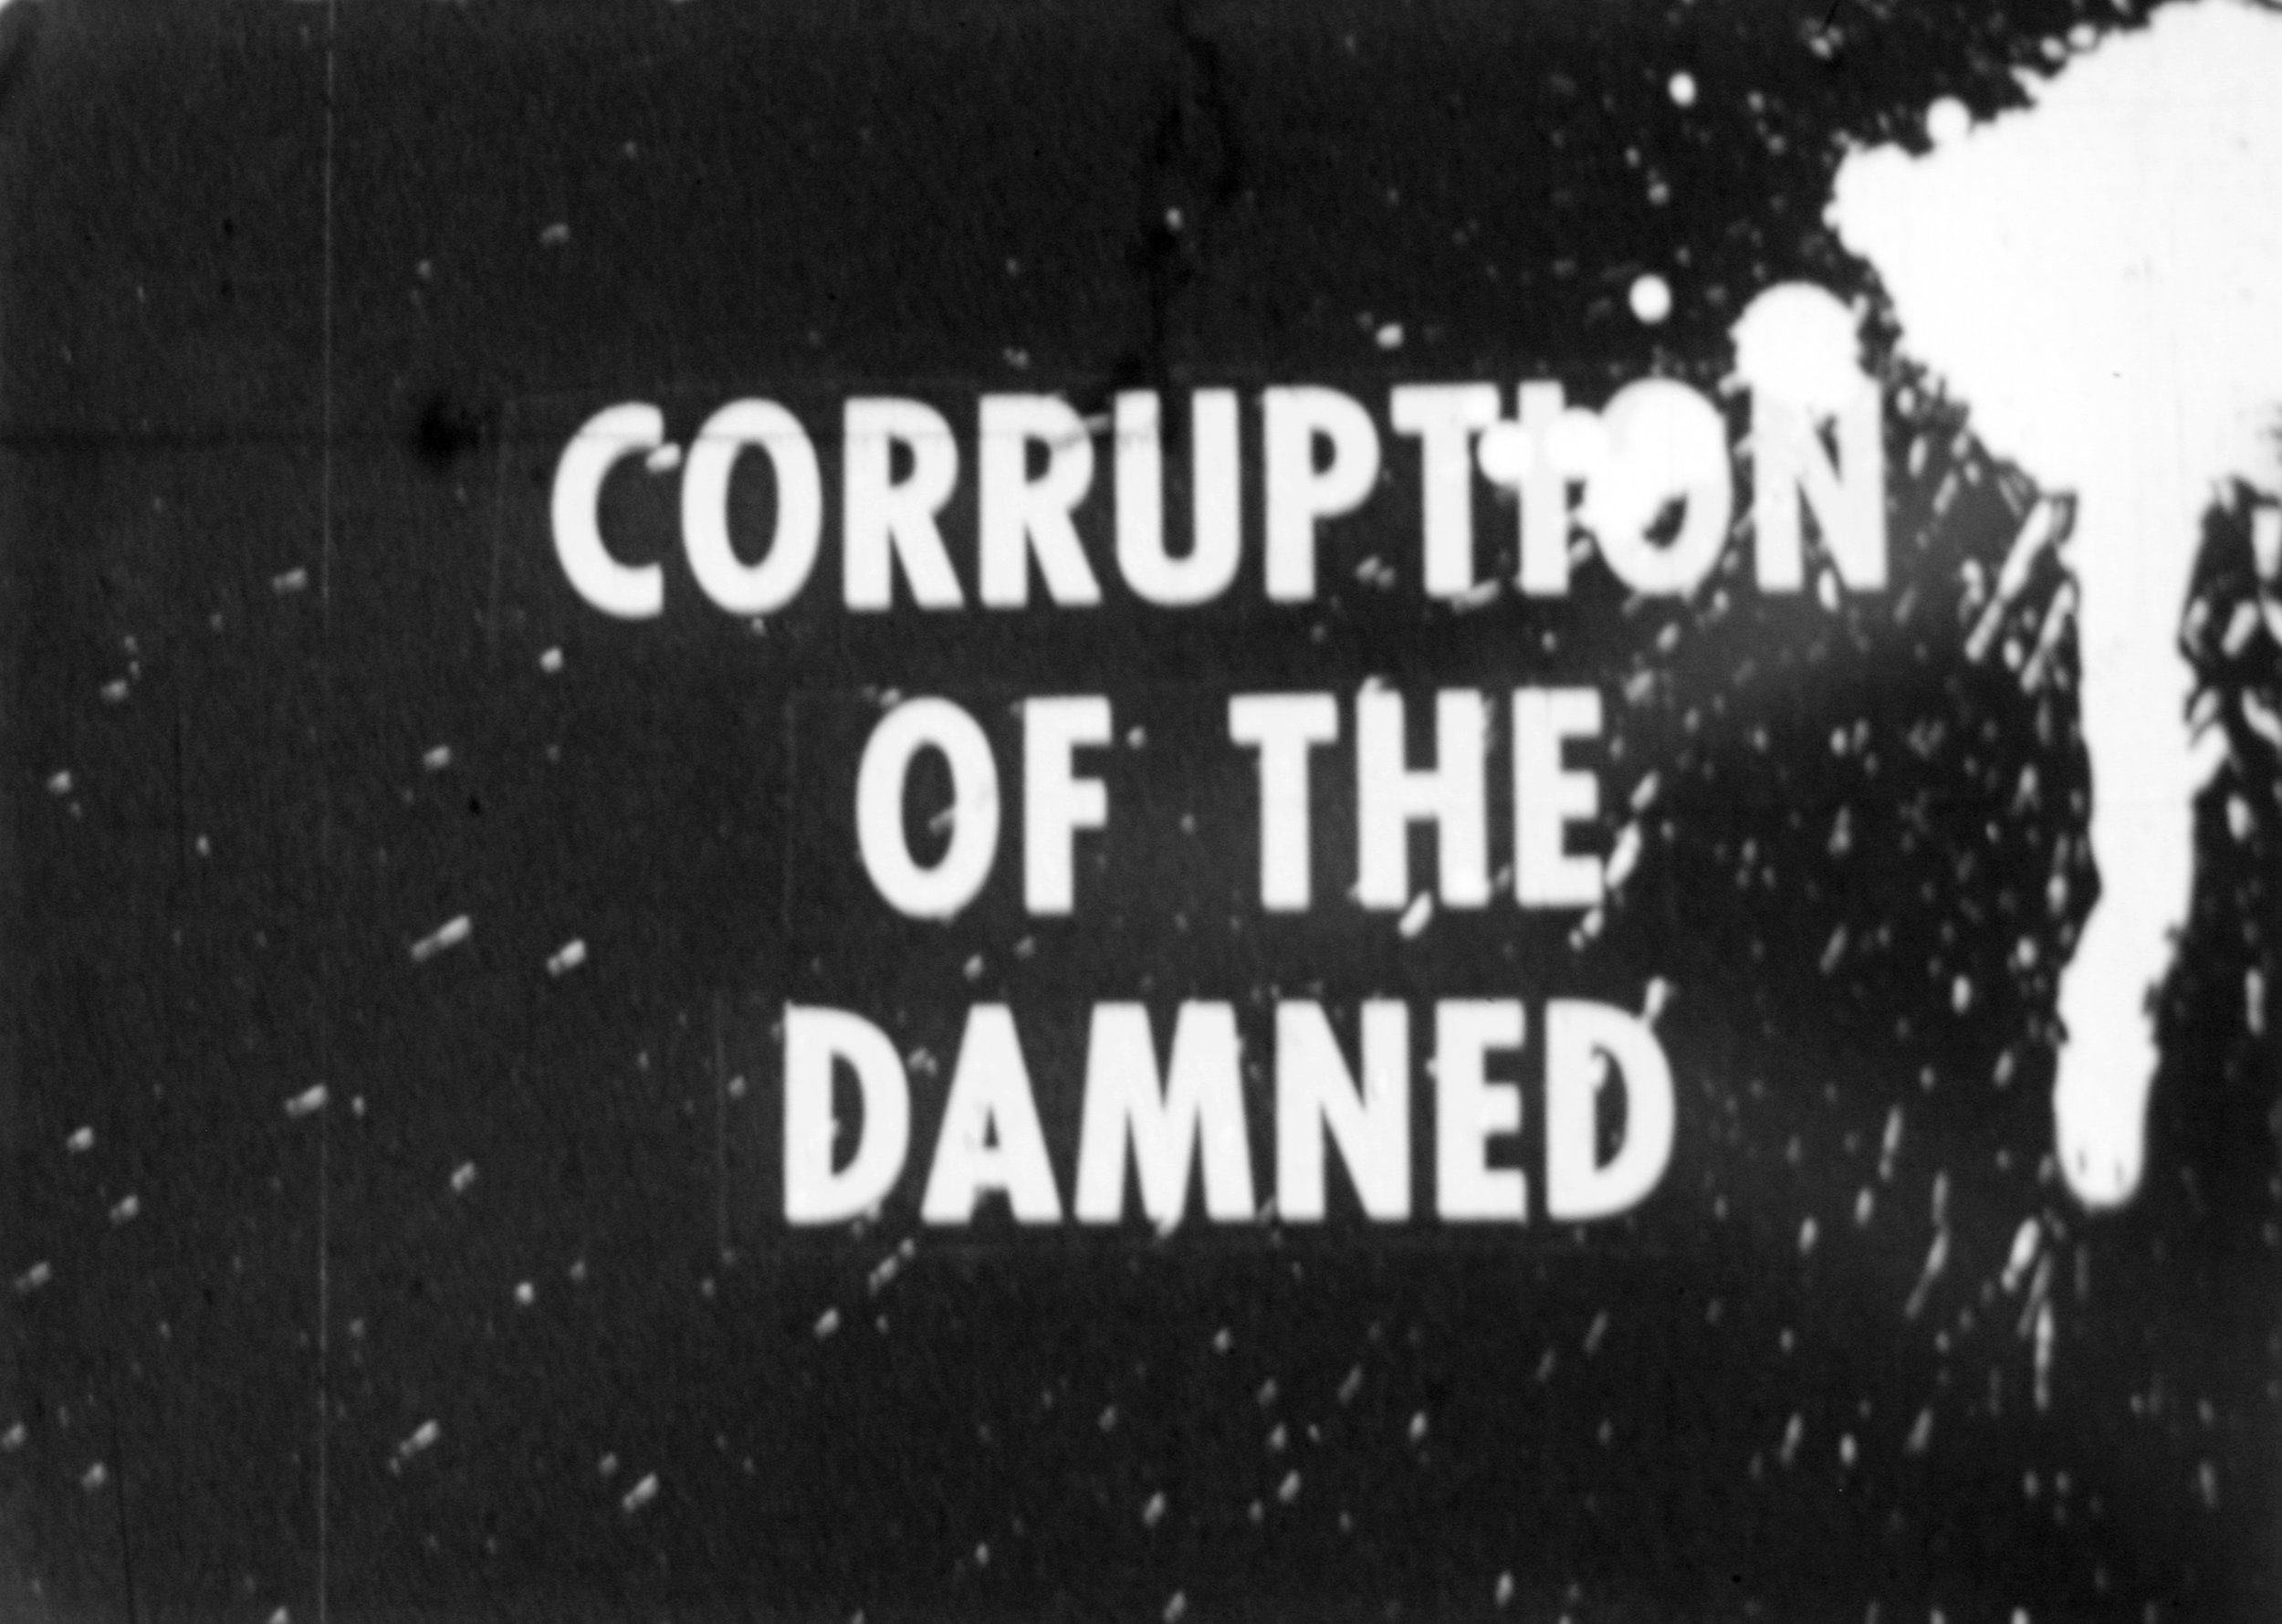   Corruption of the Damned  (1965, 16mm, B&amp;W, Sound, 55min.); © Kuchar Brothers Trust. 